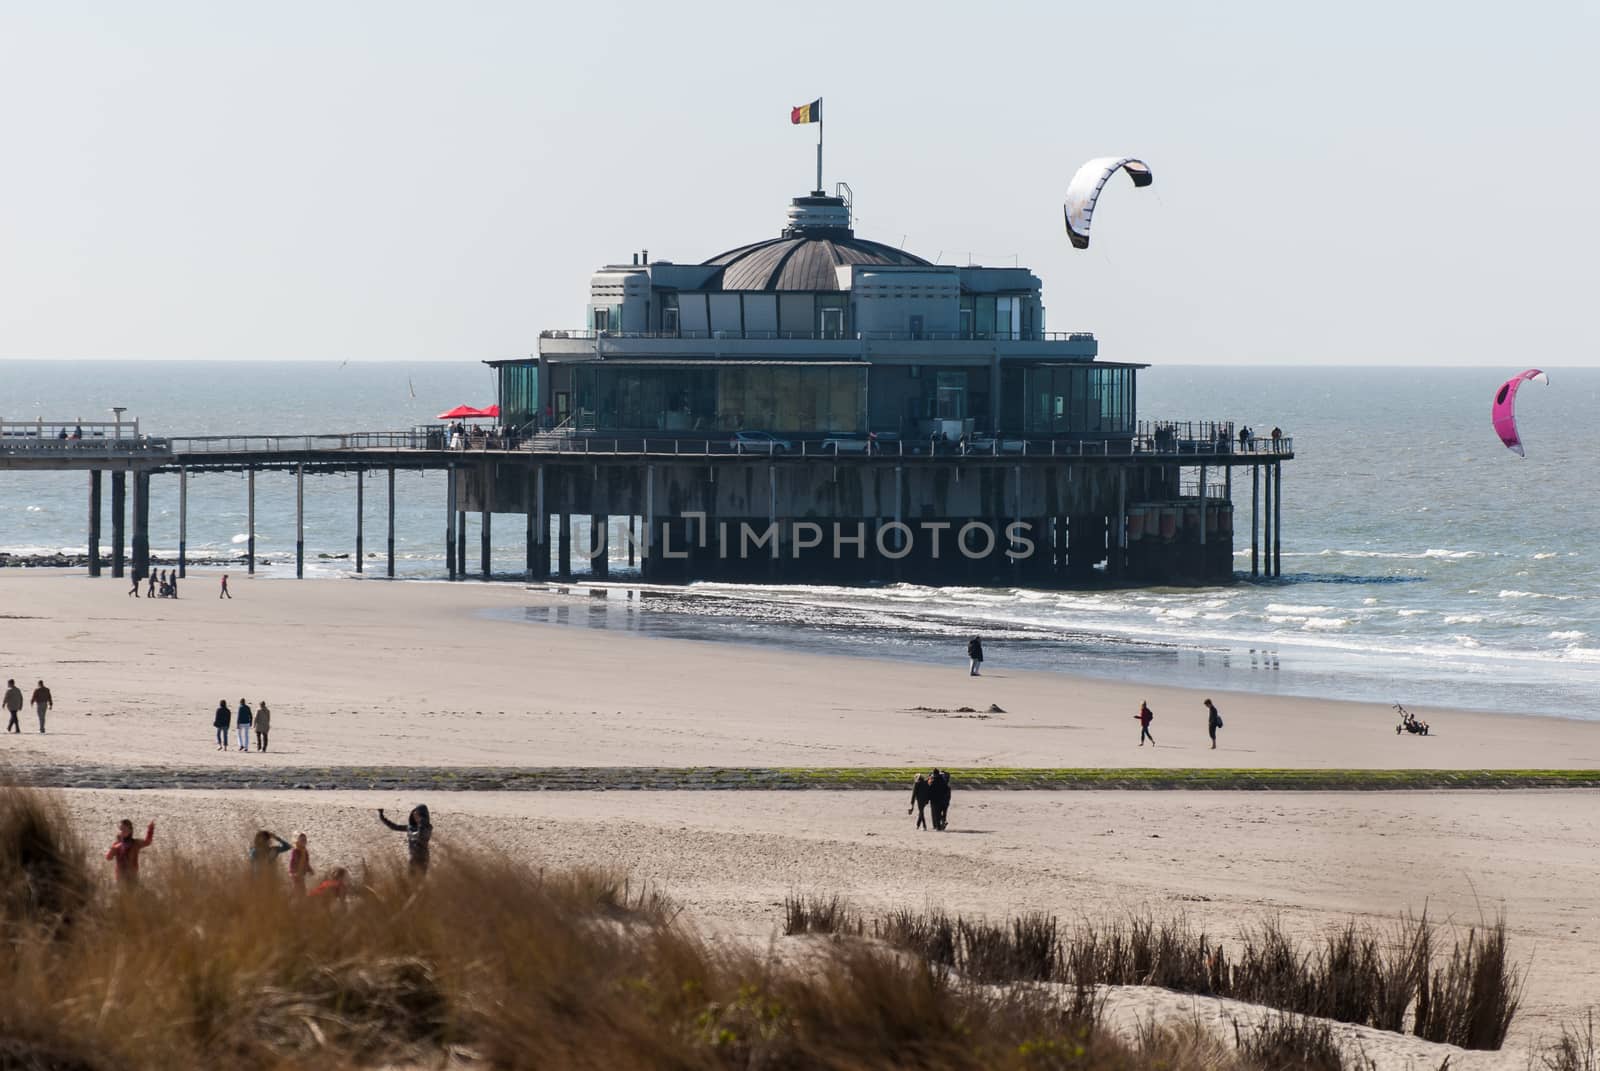 view on the jetty of Blankenberge at springtime with some kitesurfers around an people walking on the beach